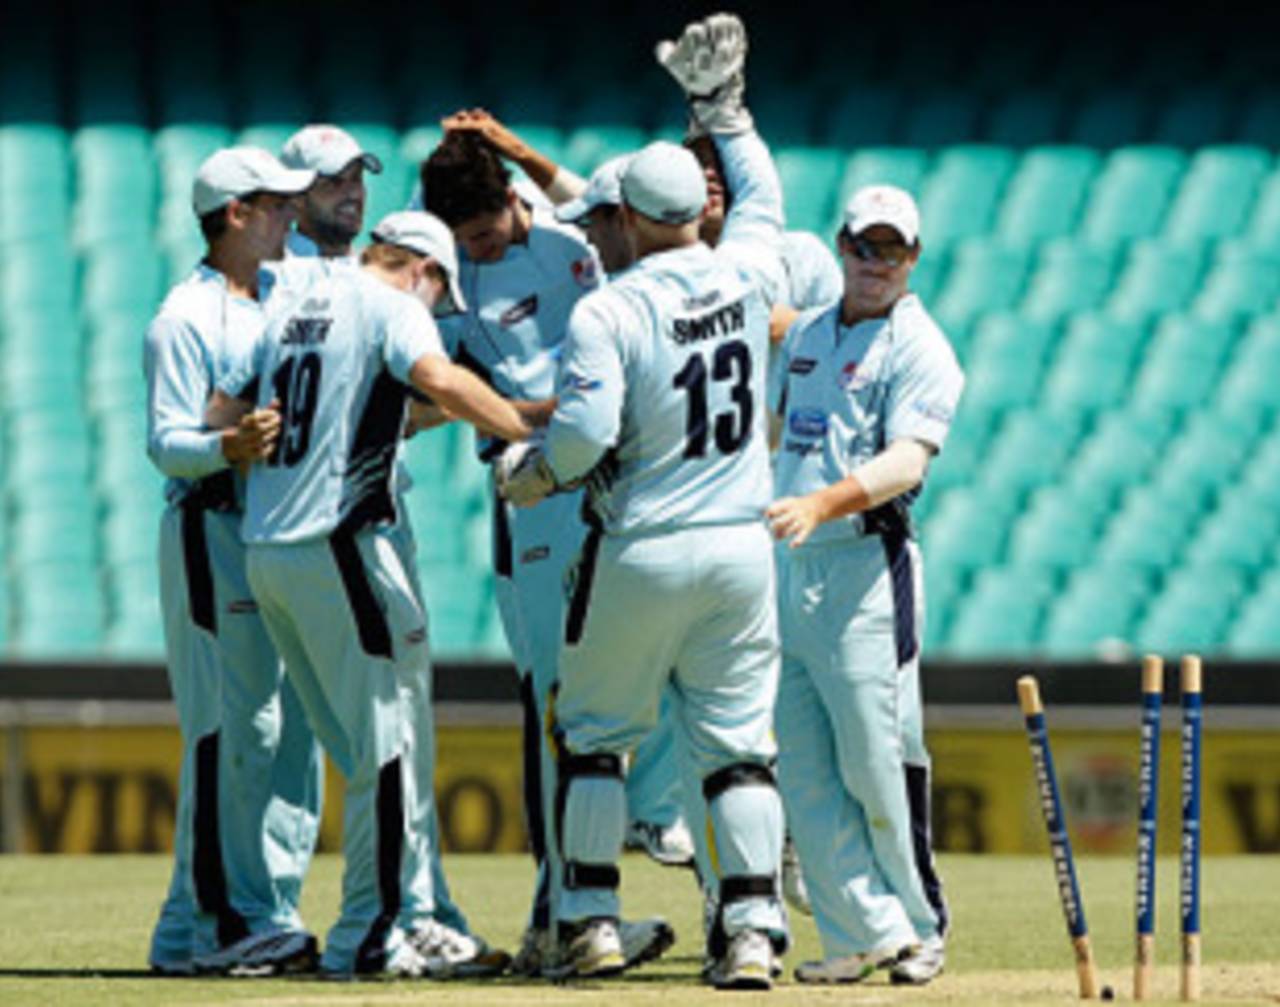 Team-mates mob Mitchell Starc after another Victoria wicket goes down, New South Wales v Victoria, Ford Ranger Cup, Sydney, December 23, 2009